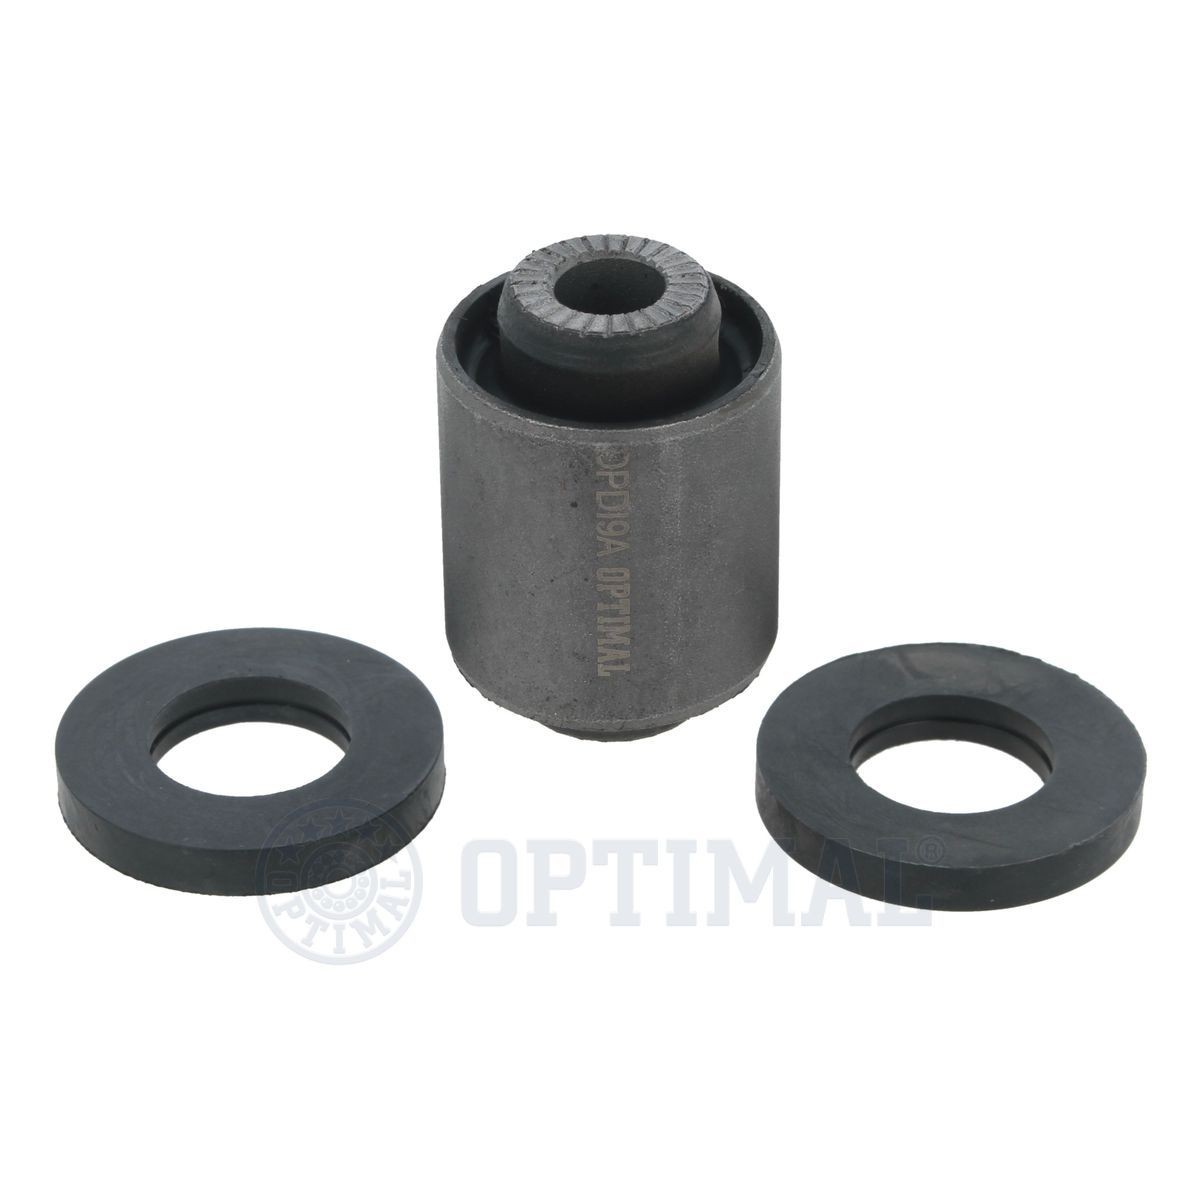 F9-0062 OPTIMAL Suspension bushes HYUNDAI with synthetic disc, Lower, Front Axle, both sides, Rubber-Metal Mount